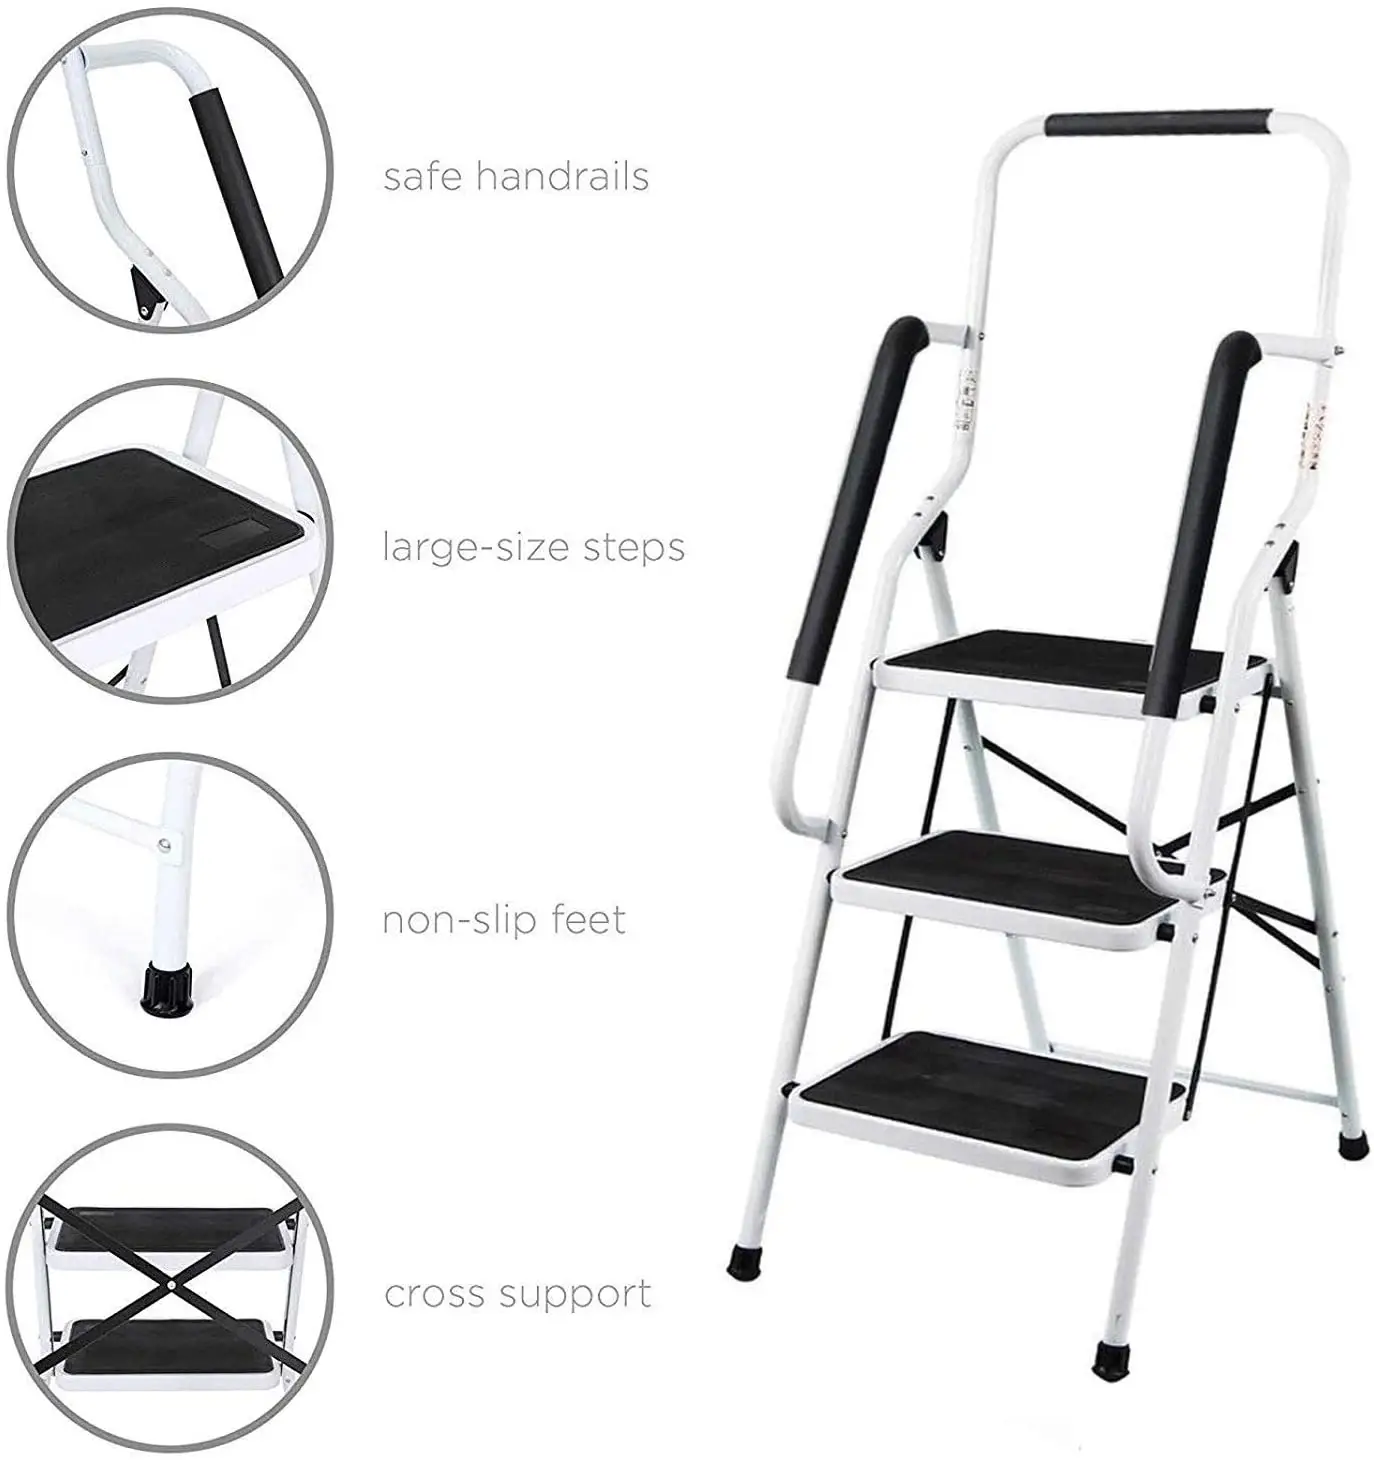 3 Step Ladder, Heavy Duty Steel Folding with Anti-Slip Rubber Mat And Safety Handrail-150kg Load